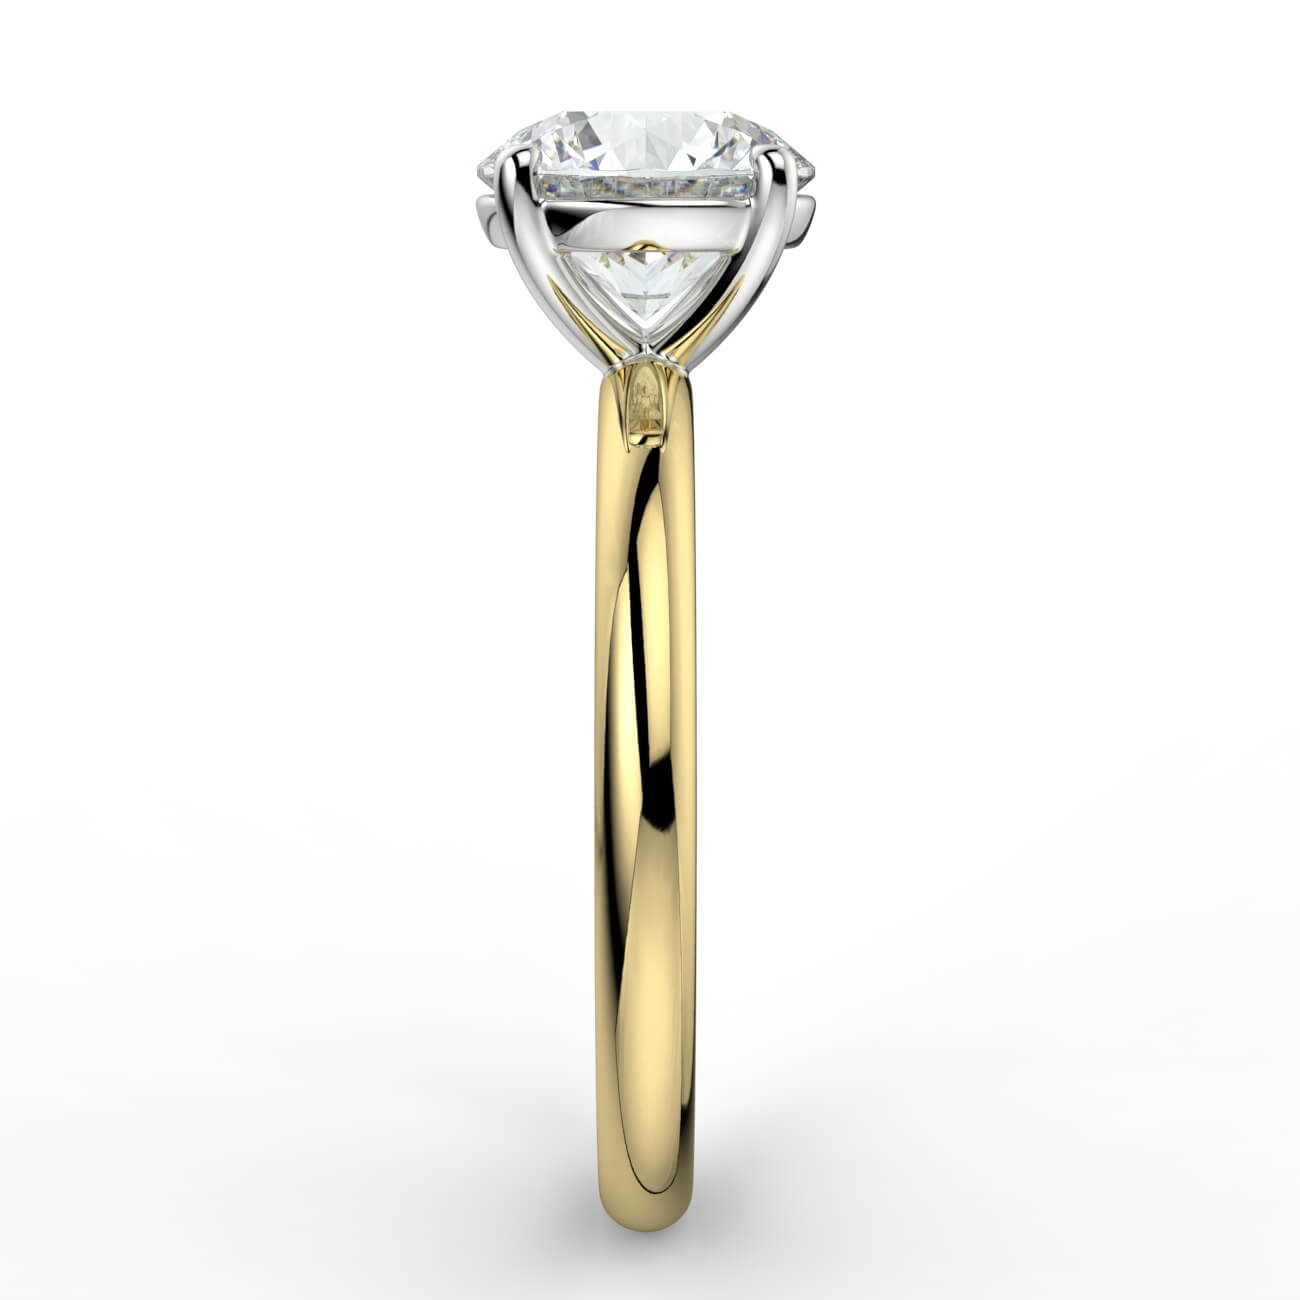 Solitaire diamond engagement ring in yellow and white gold – Australian Diamond Network